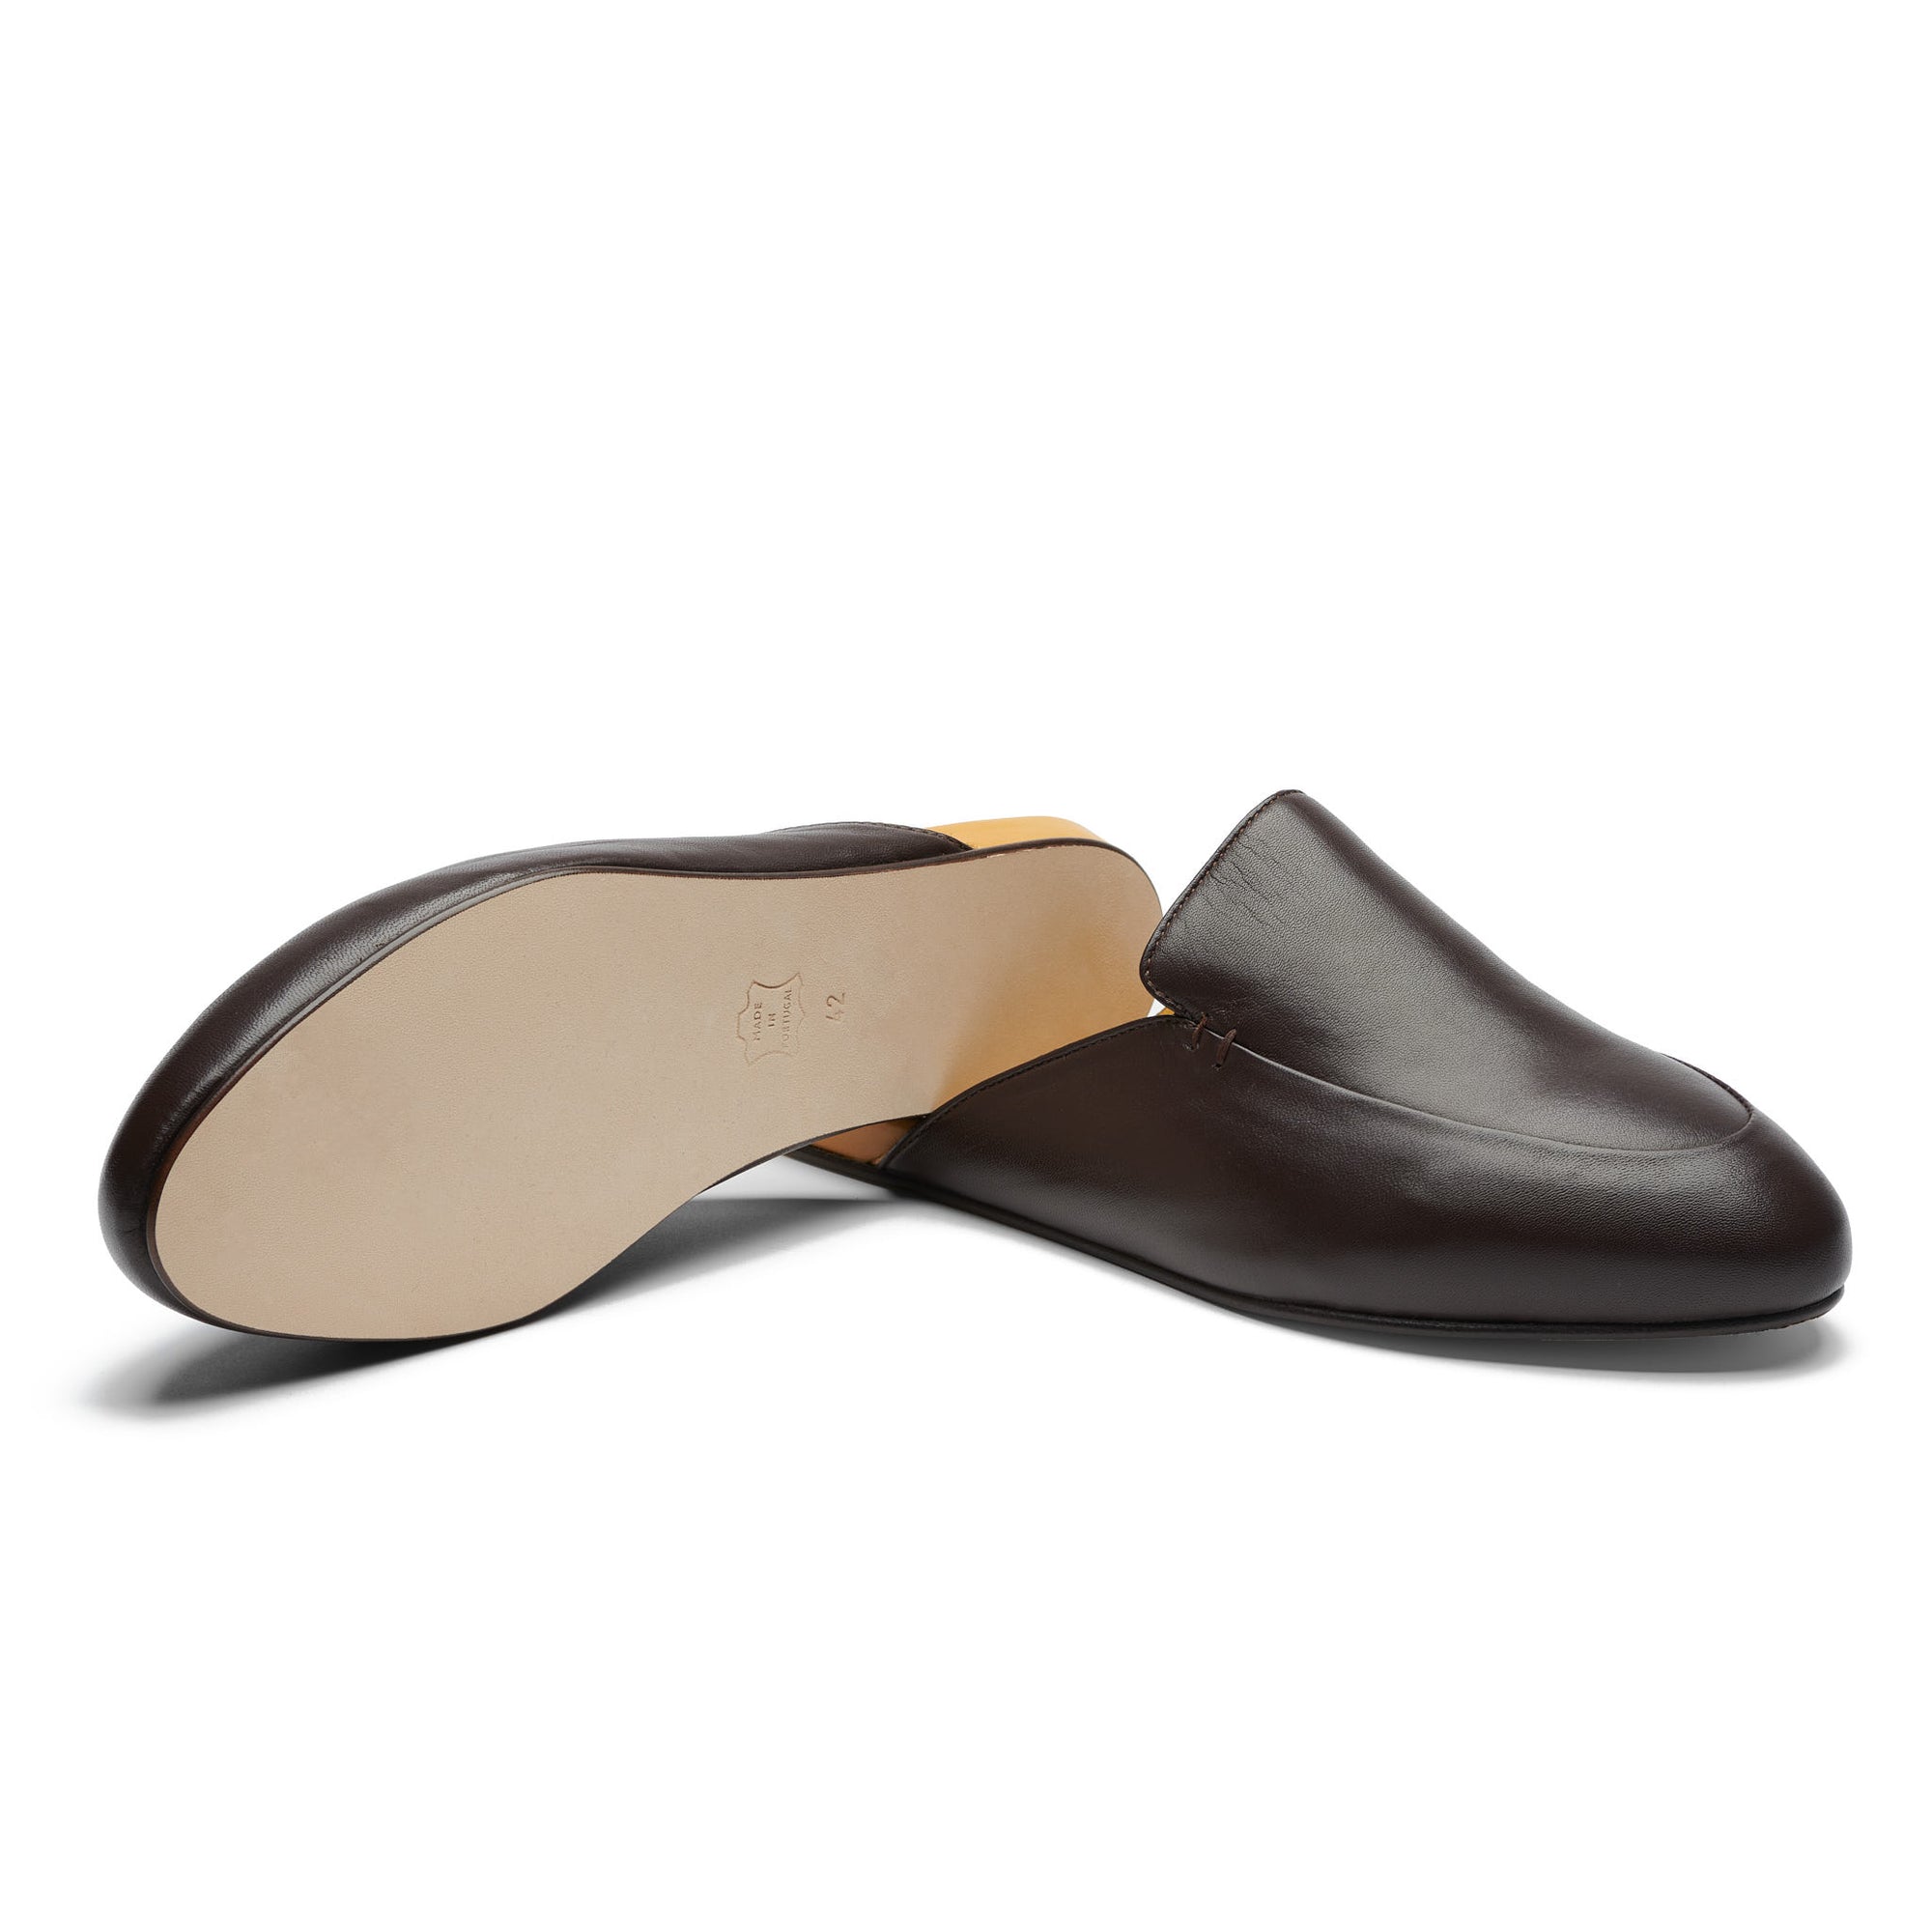 Men's Dark Brown Leather Slippers with Leather Sole